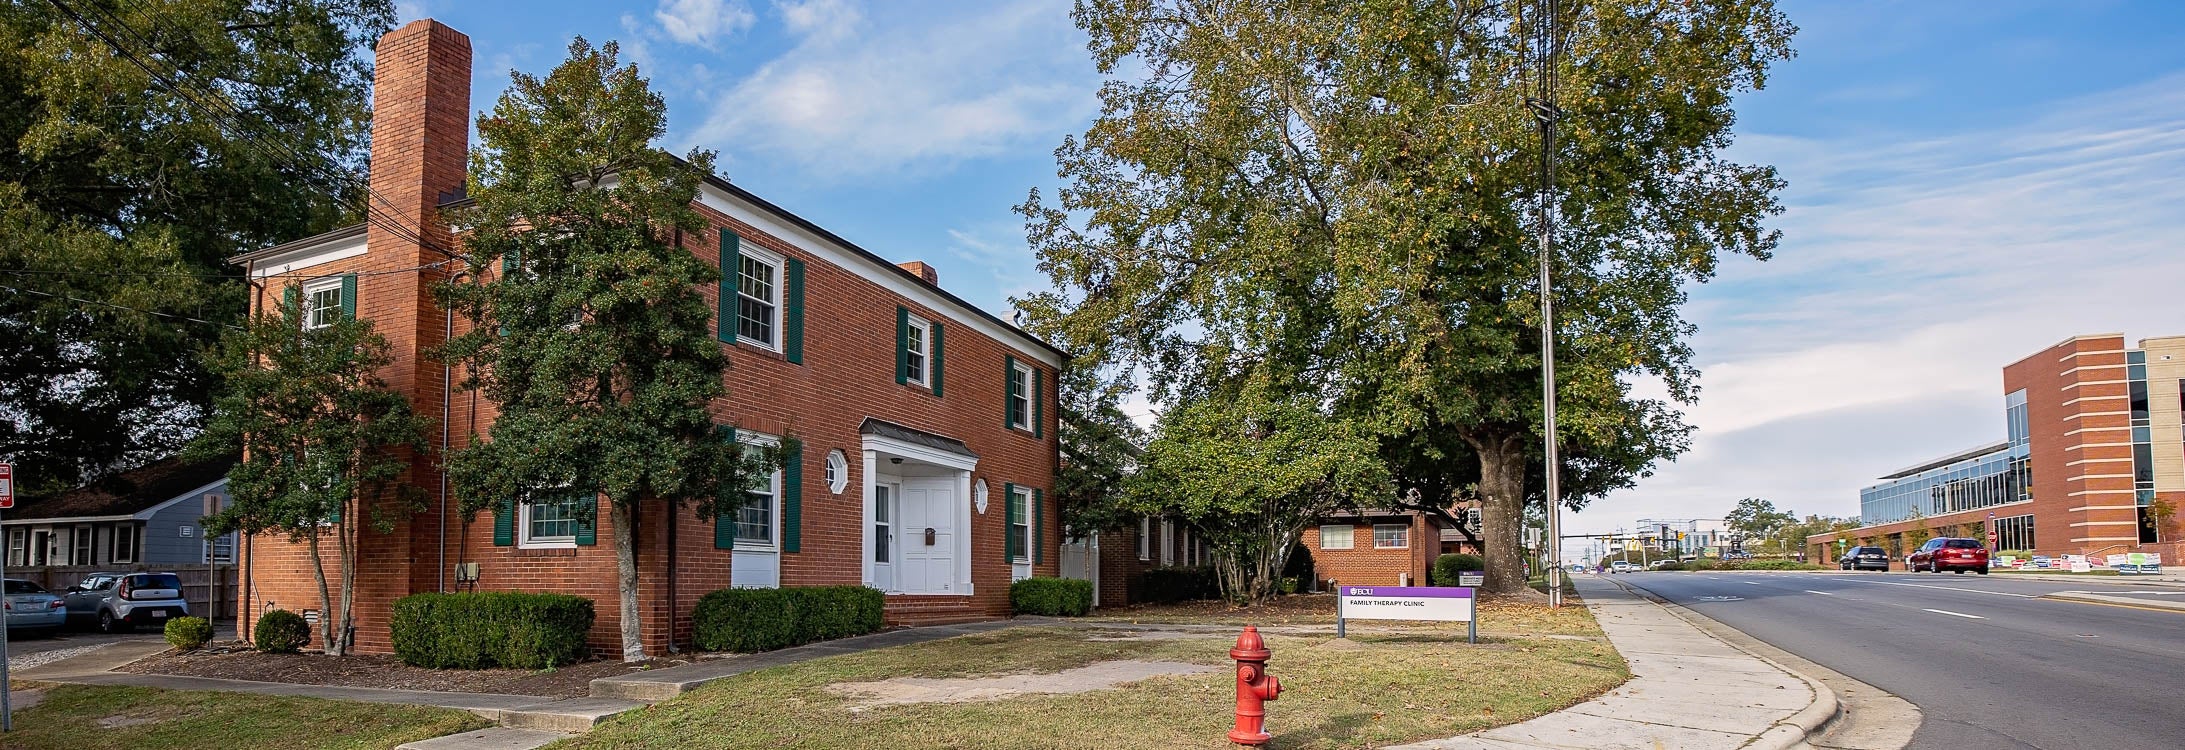 The ECU Family Therapy Clinic, located on 10th street. (ECU Photo by Cliff Hollis)